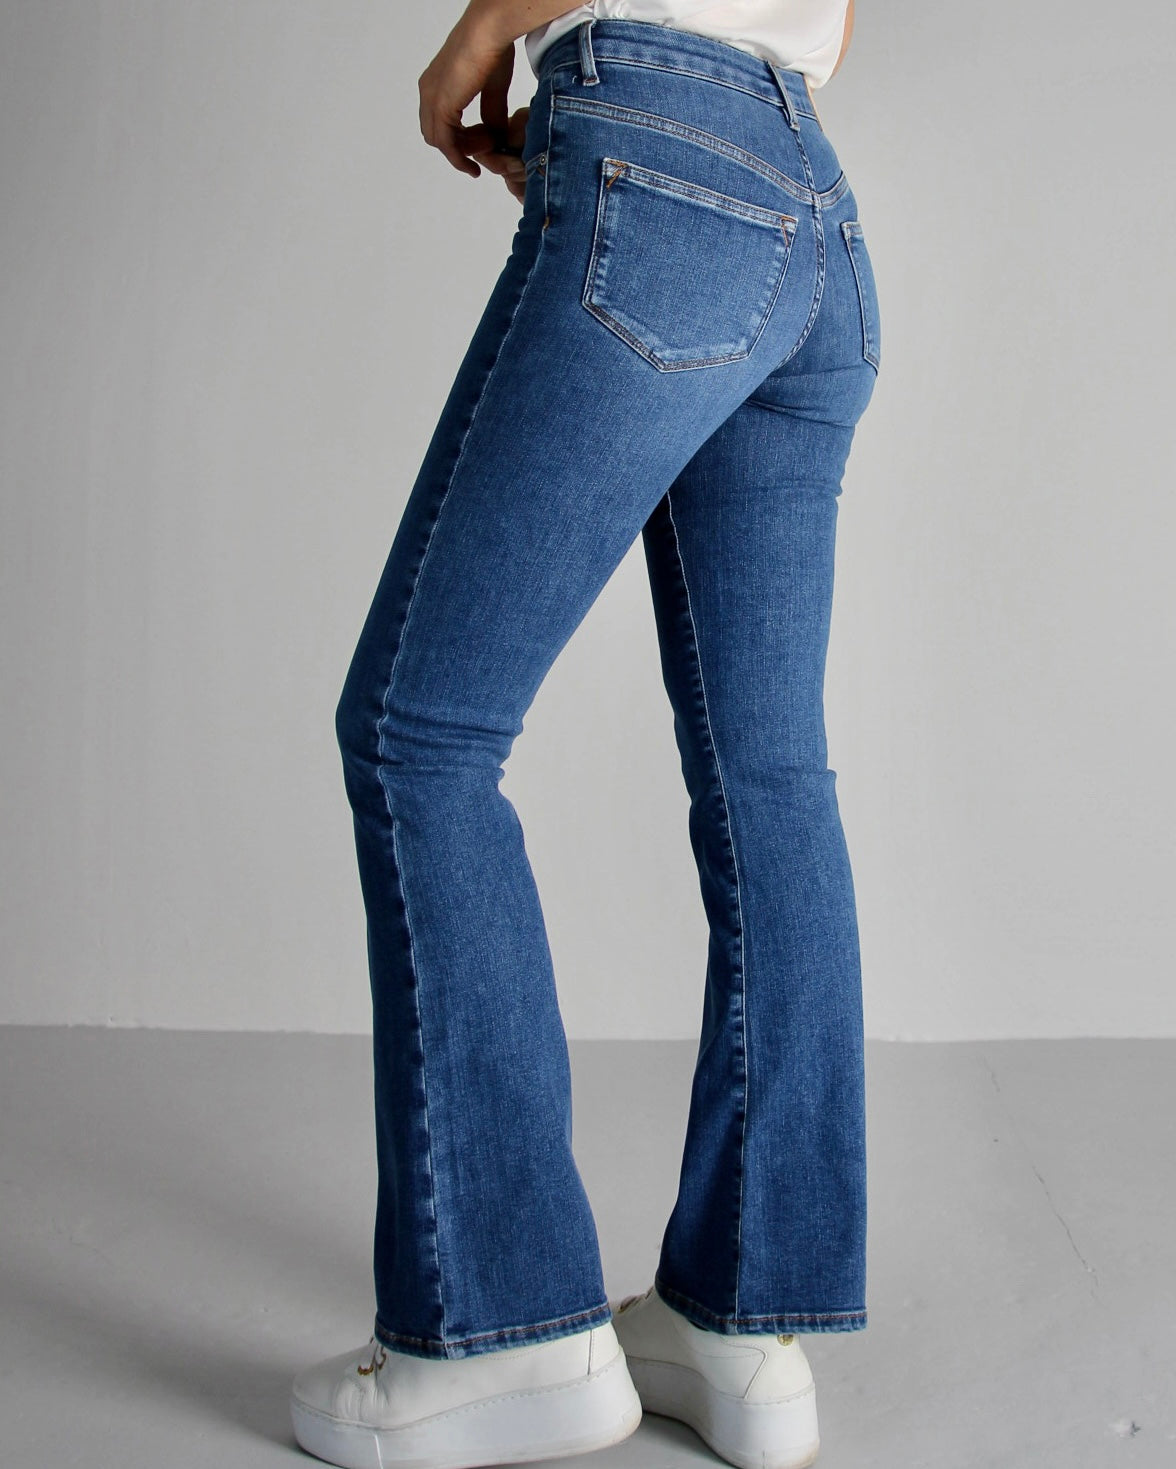 Wesley Stone blue Jeans - Dame - Bootcut - Flare - High waist - Stretchy